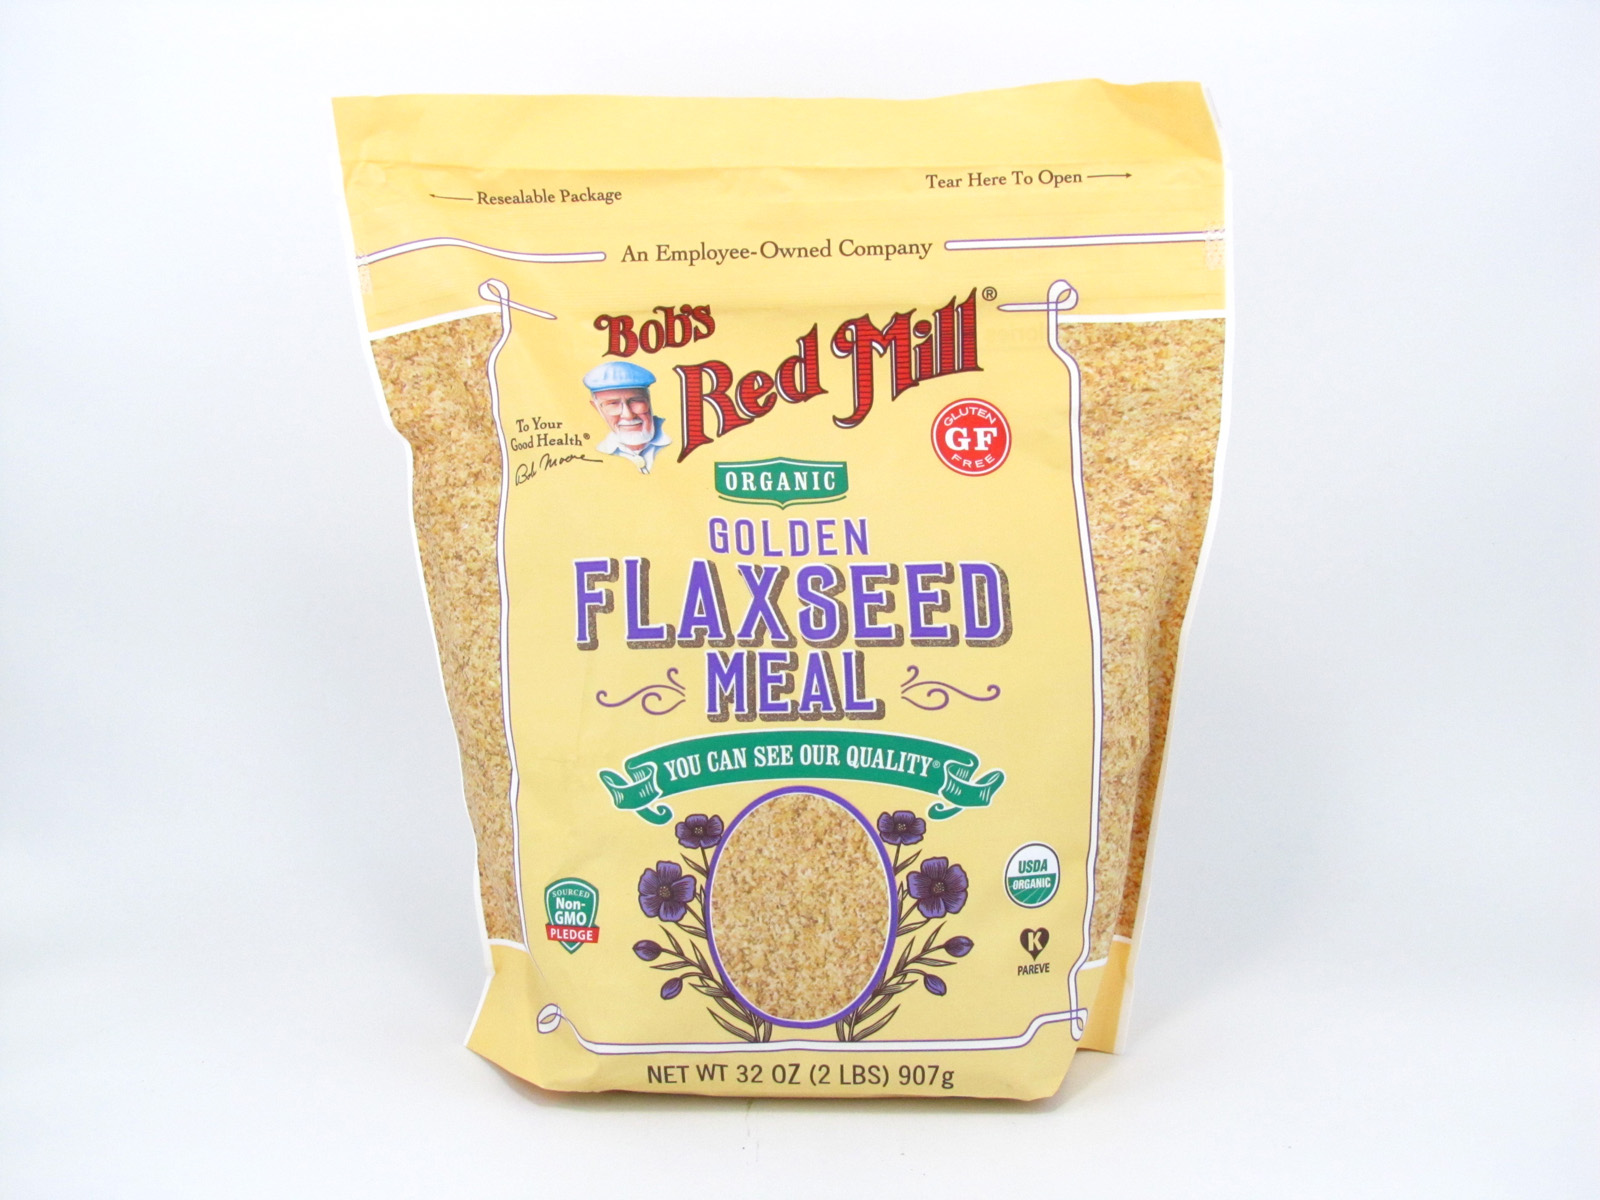 Bob's Red Mill - Organic Golden Flaxseed Meal - front view